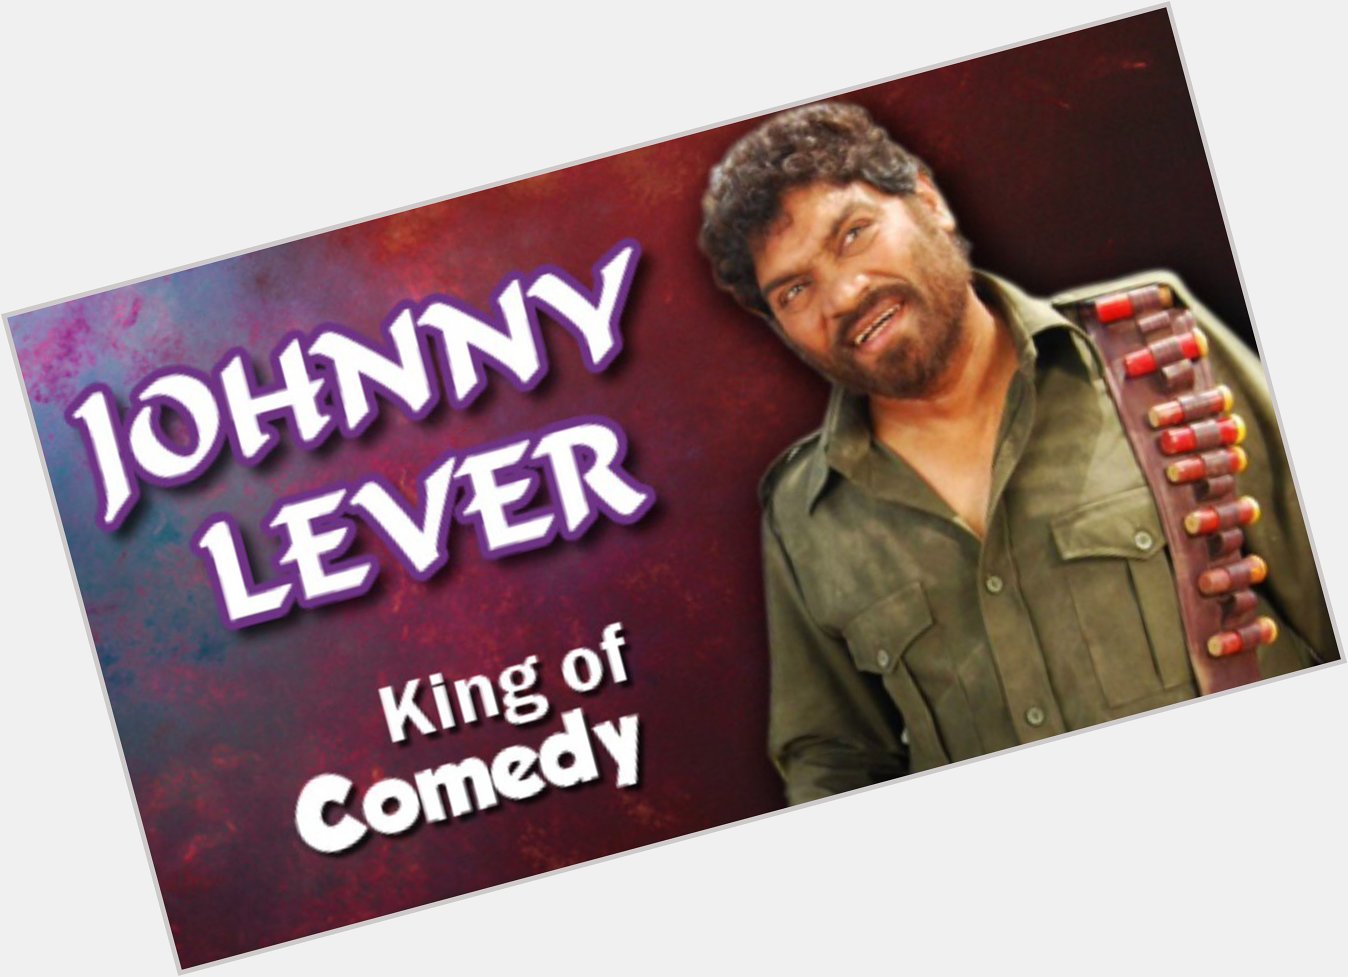 A Very Happy Birthday to the king of comedy, Johnny Lever Sir! 